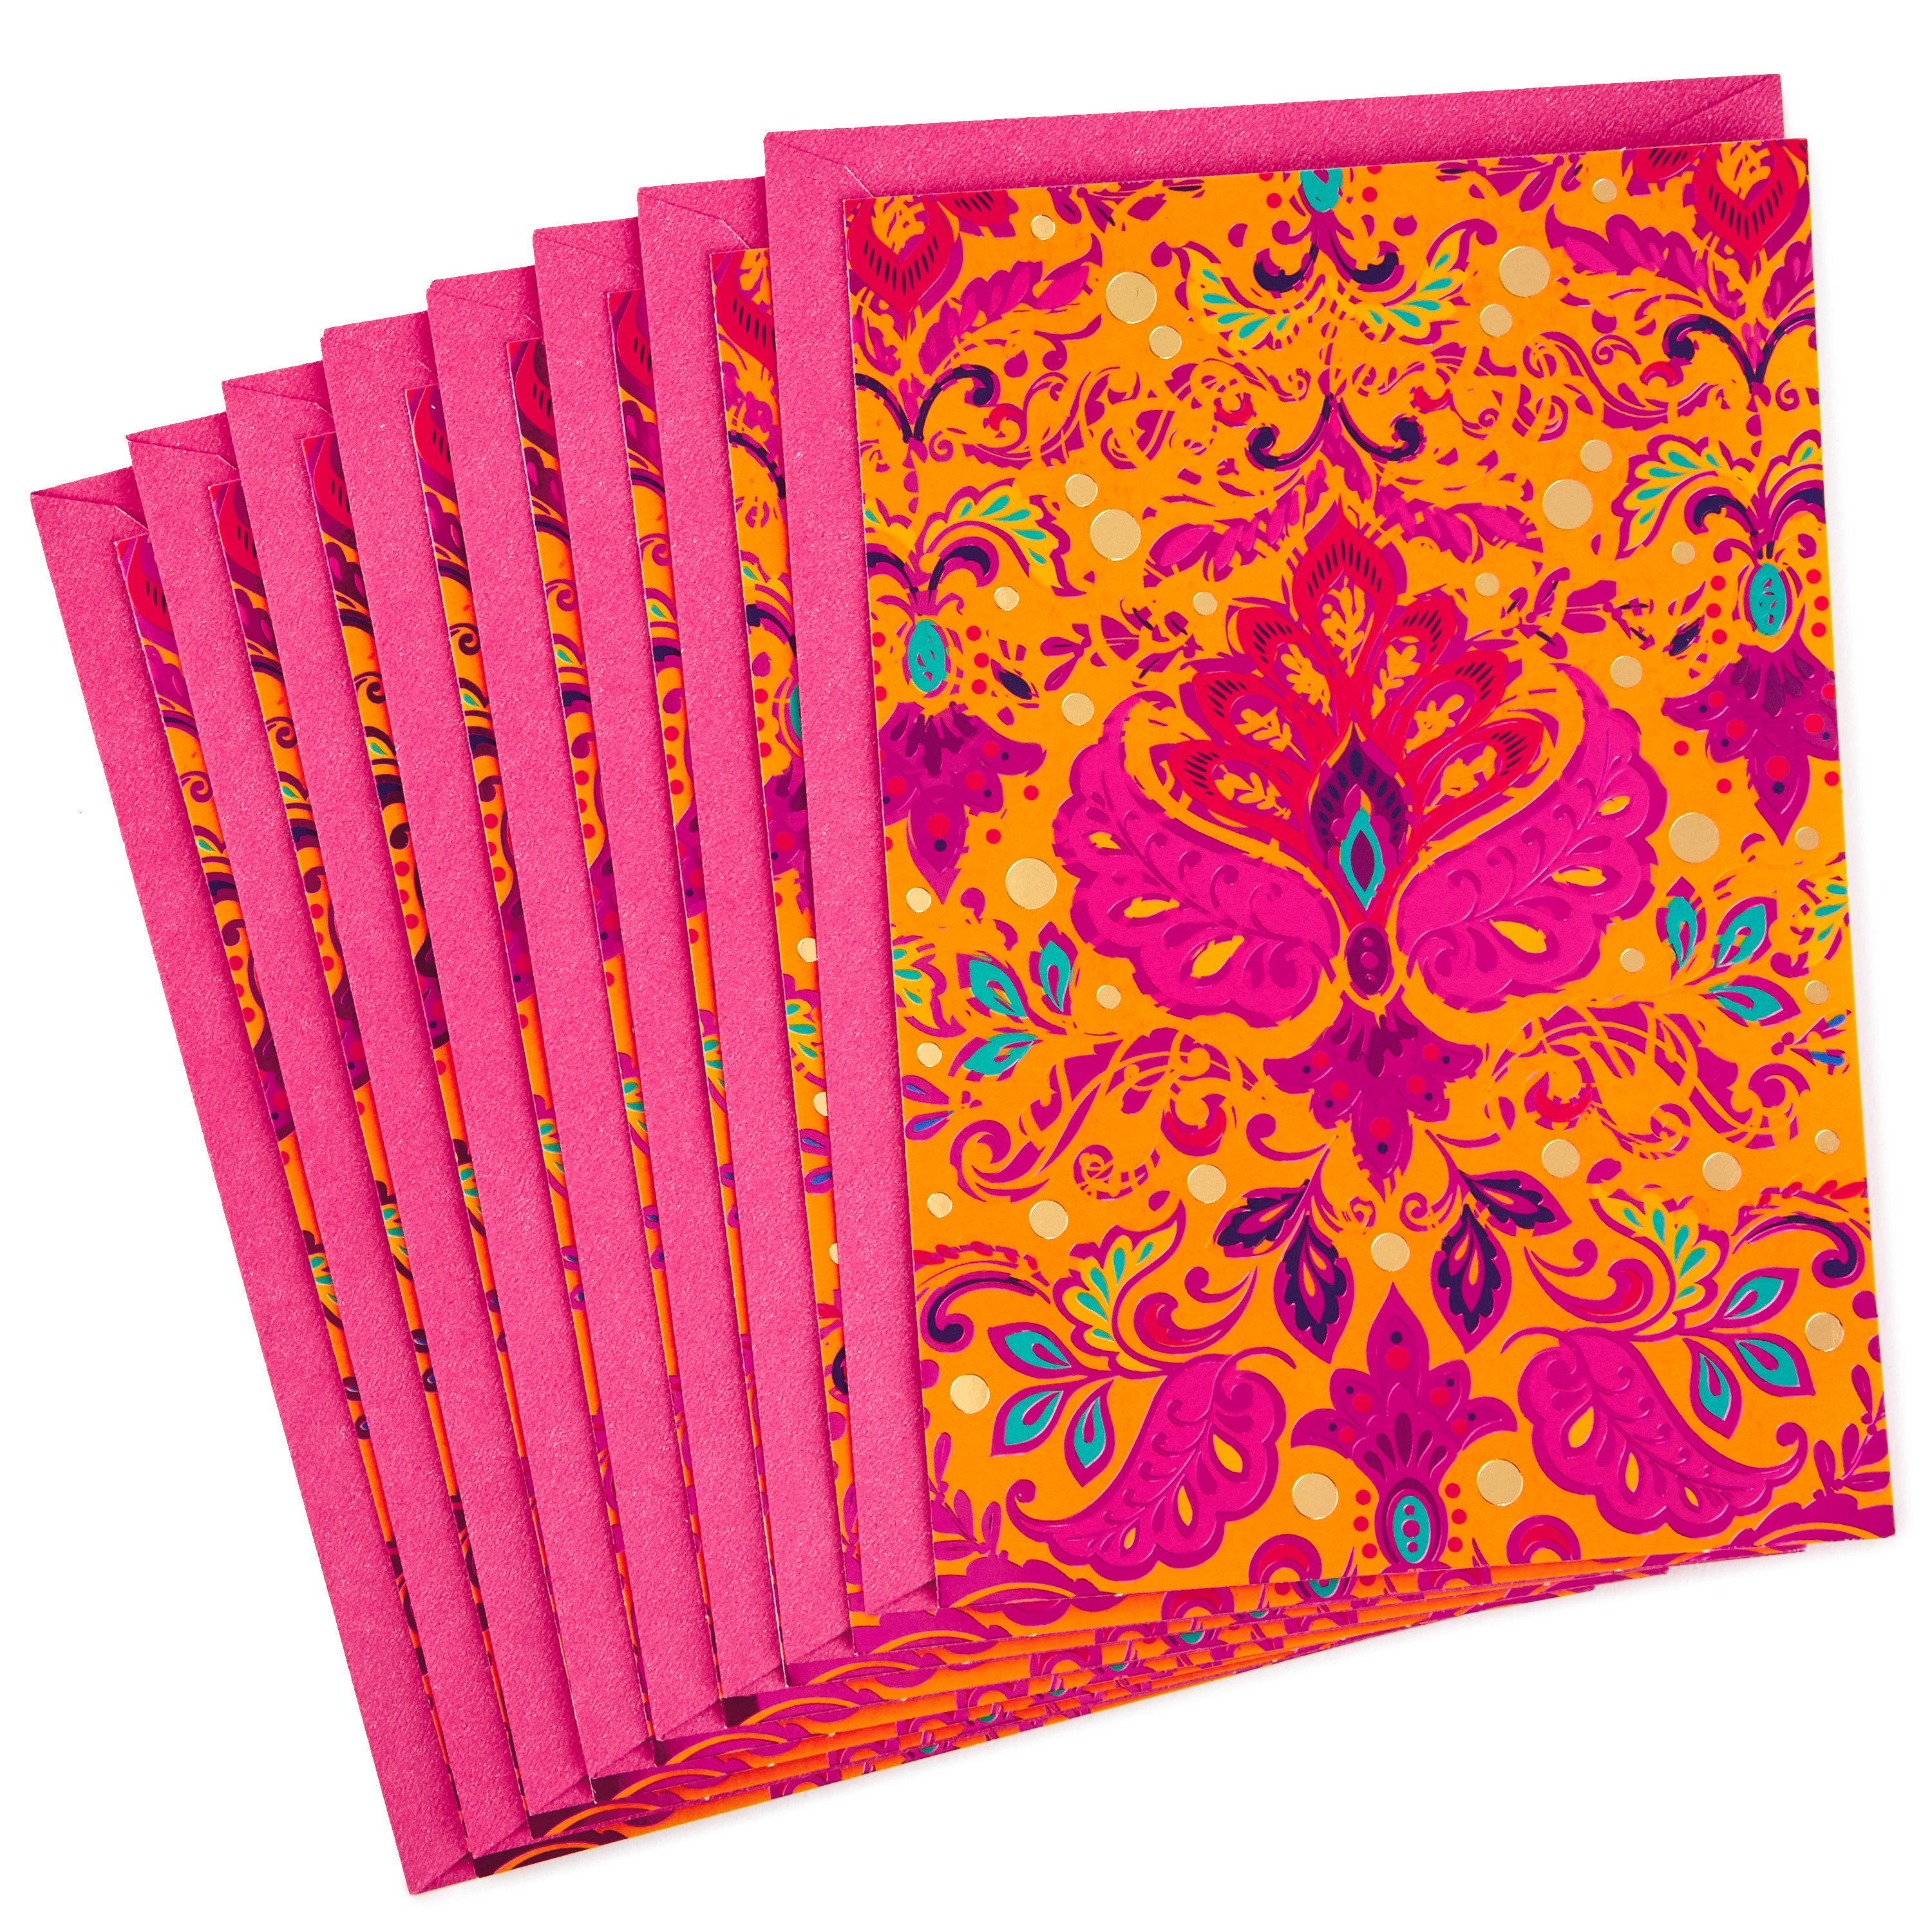  Golden Thread Pack of Blank Cards, Jeweled Indian Pattern (8 Cards with Envelopes)